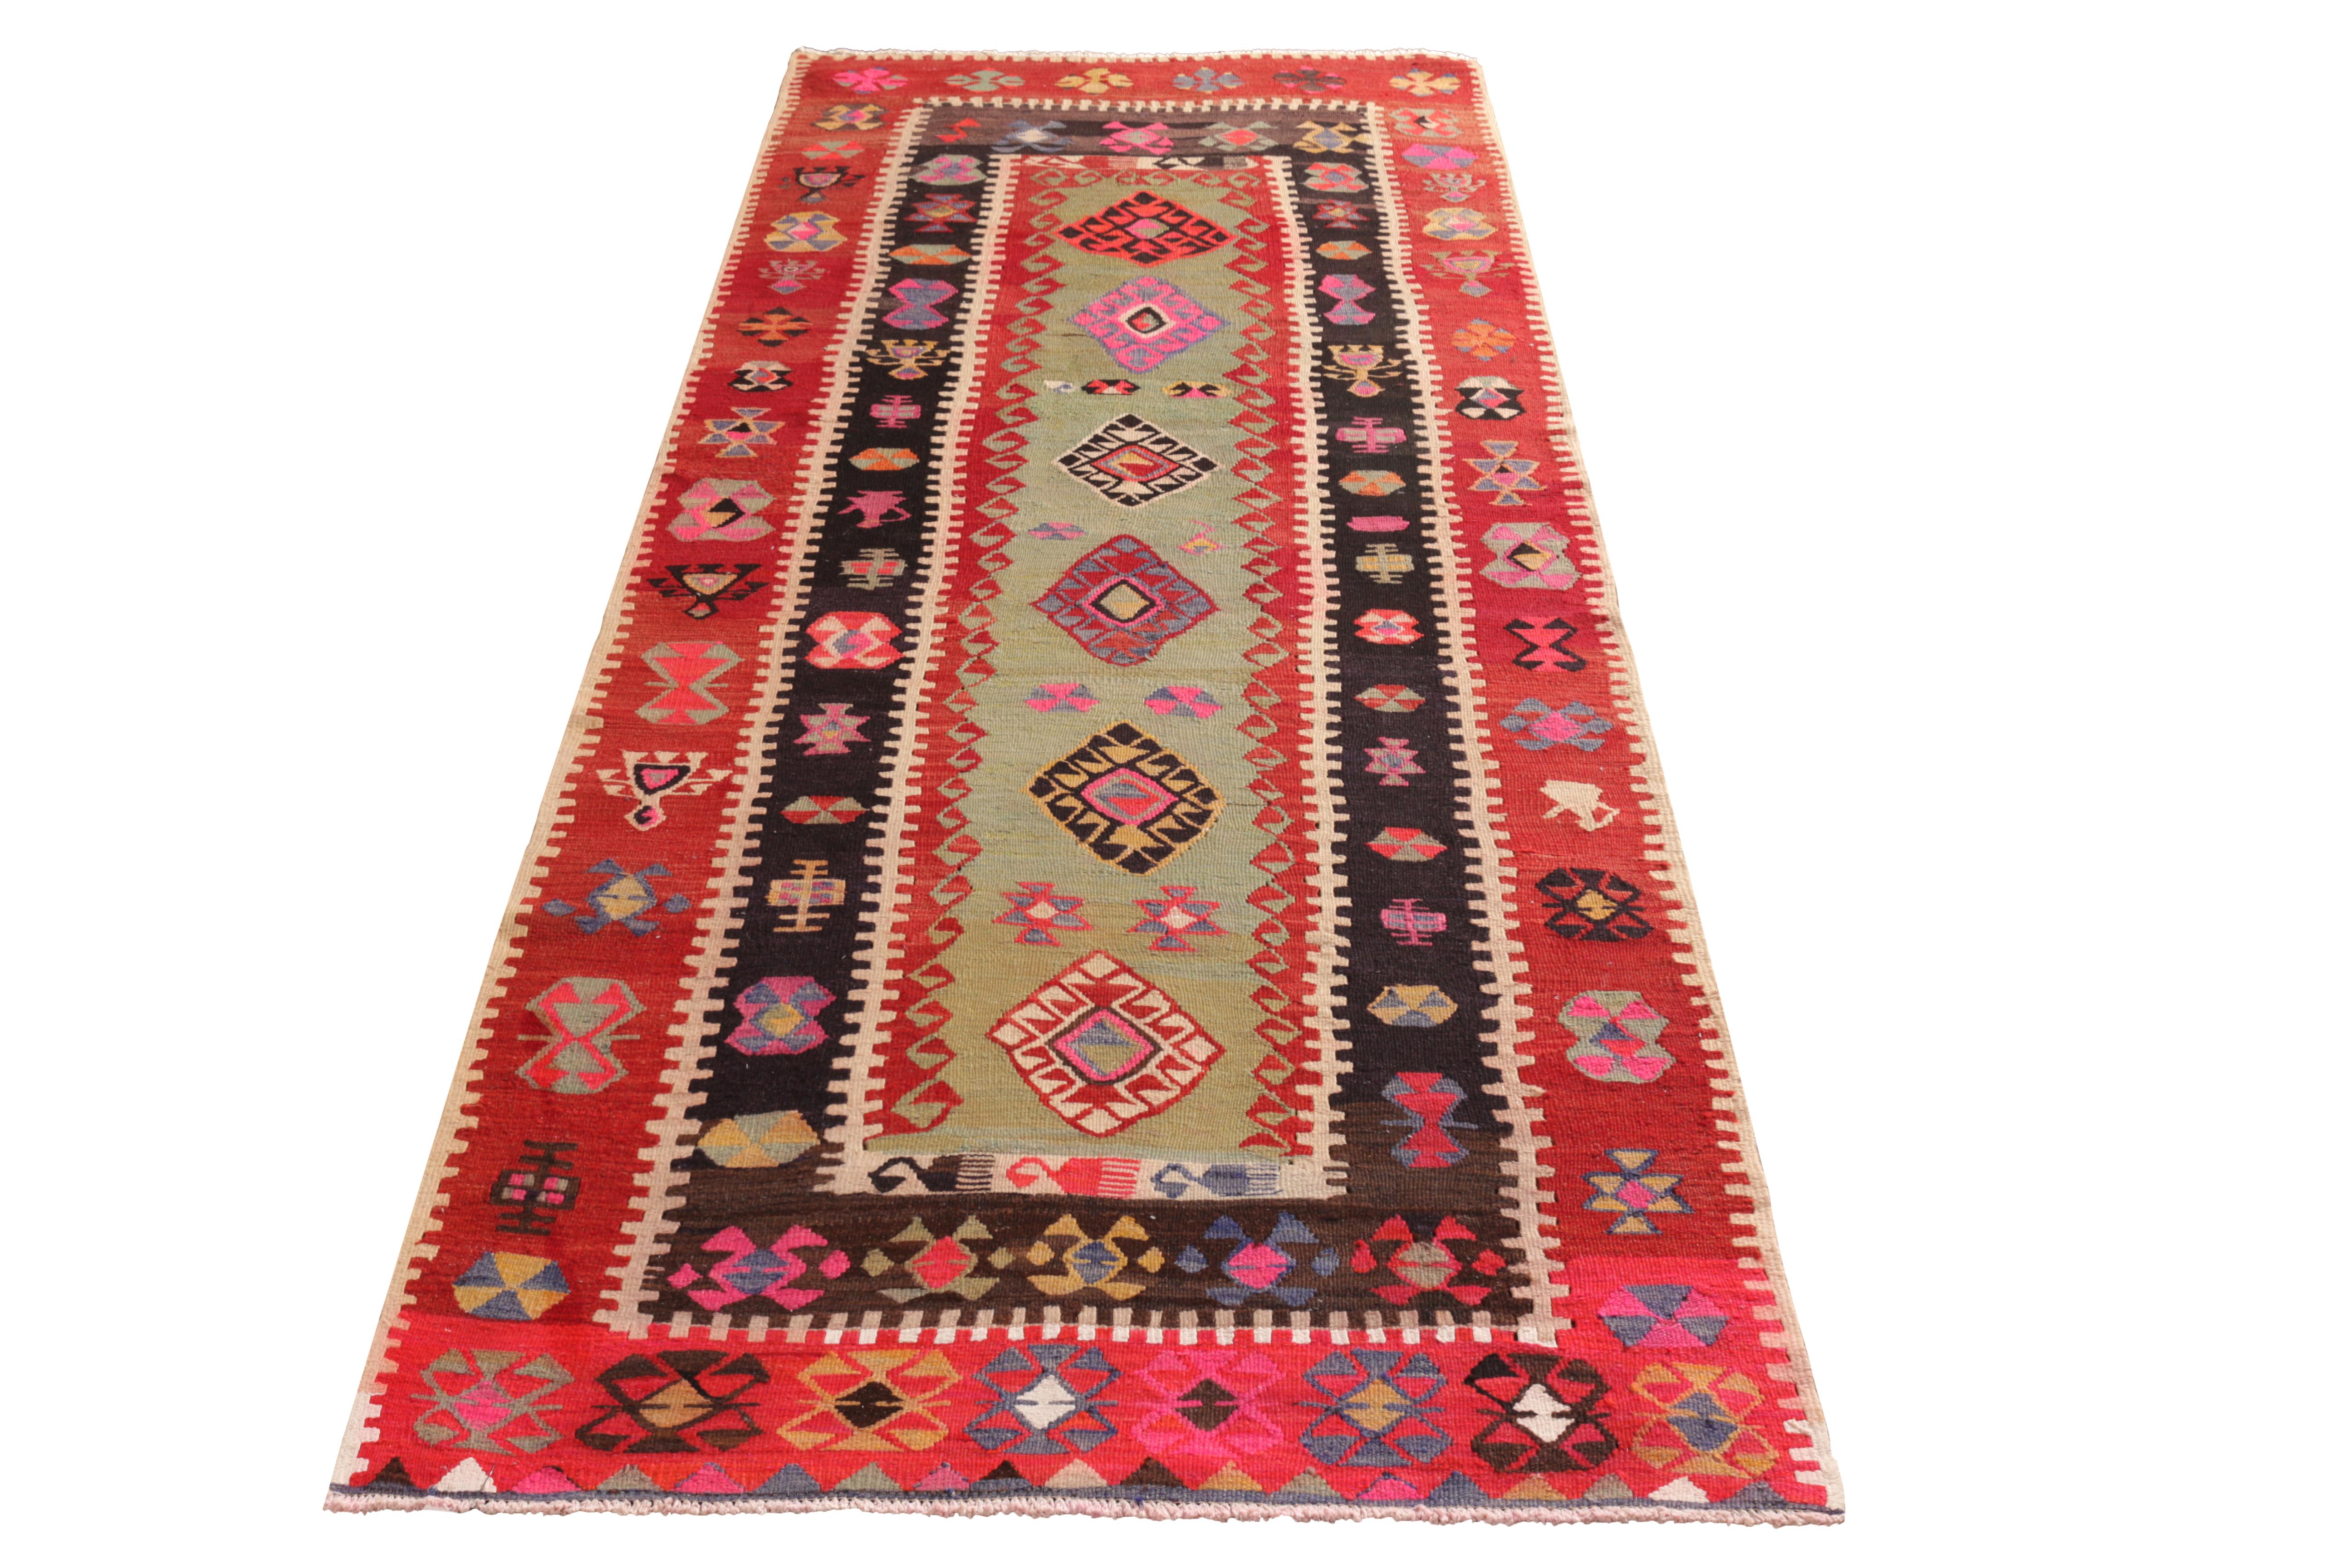 Hand knotted in wool originating from Turkey circa 1950-1960, this midcentury runner denotes a vintage Anatolian rug design, enjoying coloral tribal motifs in playful variations against prevailing, rich red and green colorway tones. Among the bright